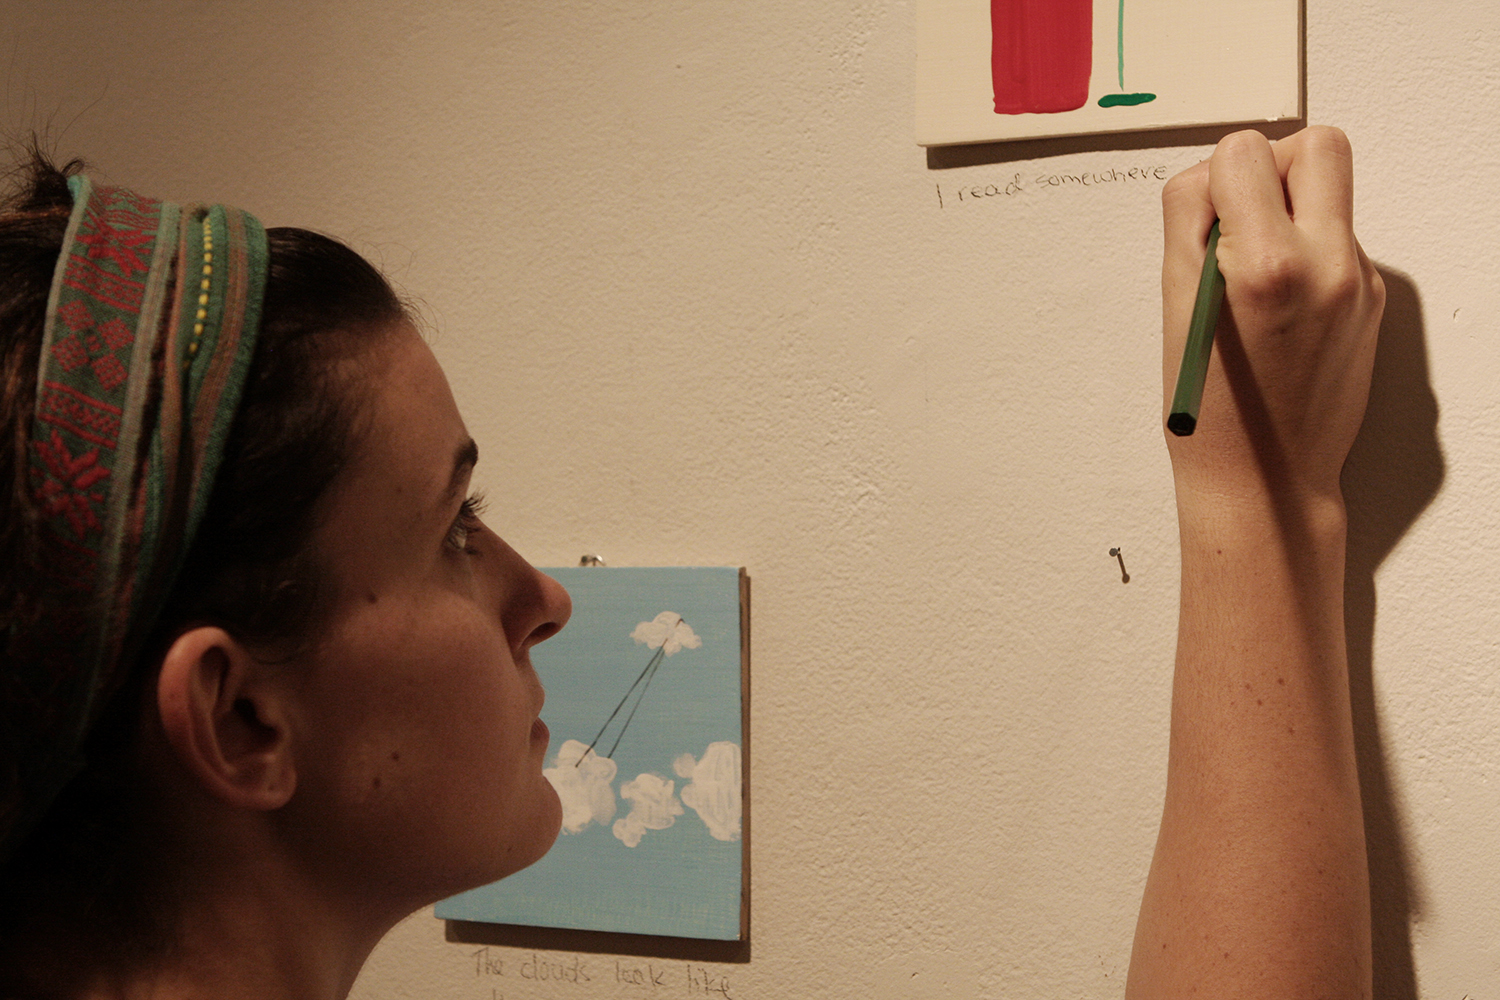   Today speak only in pictures , 2013, participant writing her submitted words under her painting 